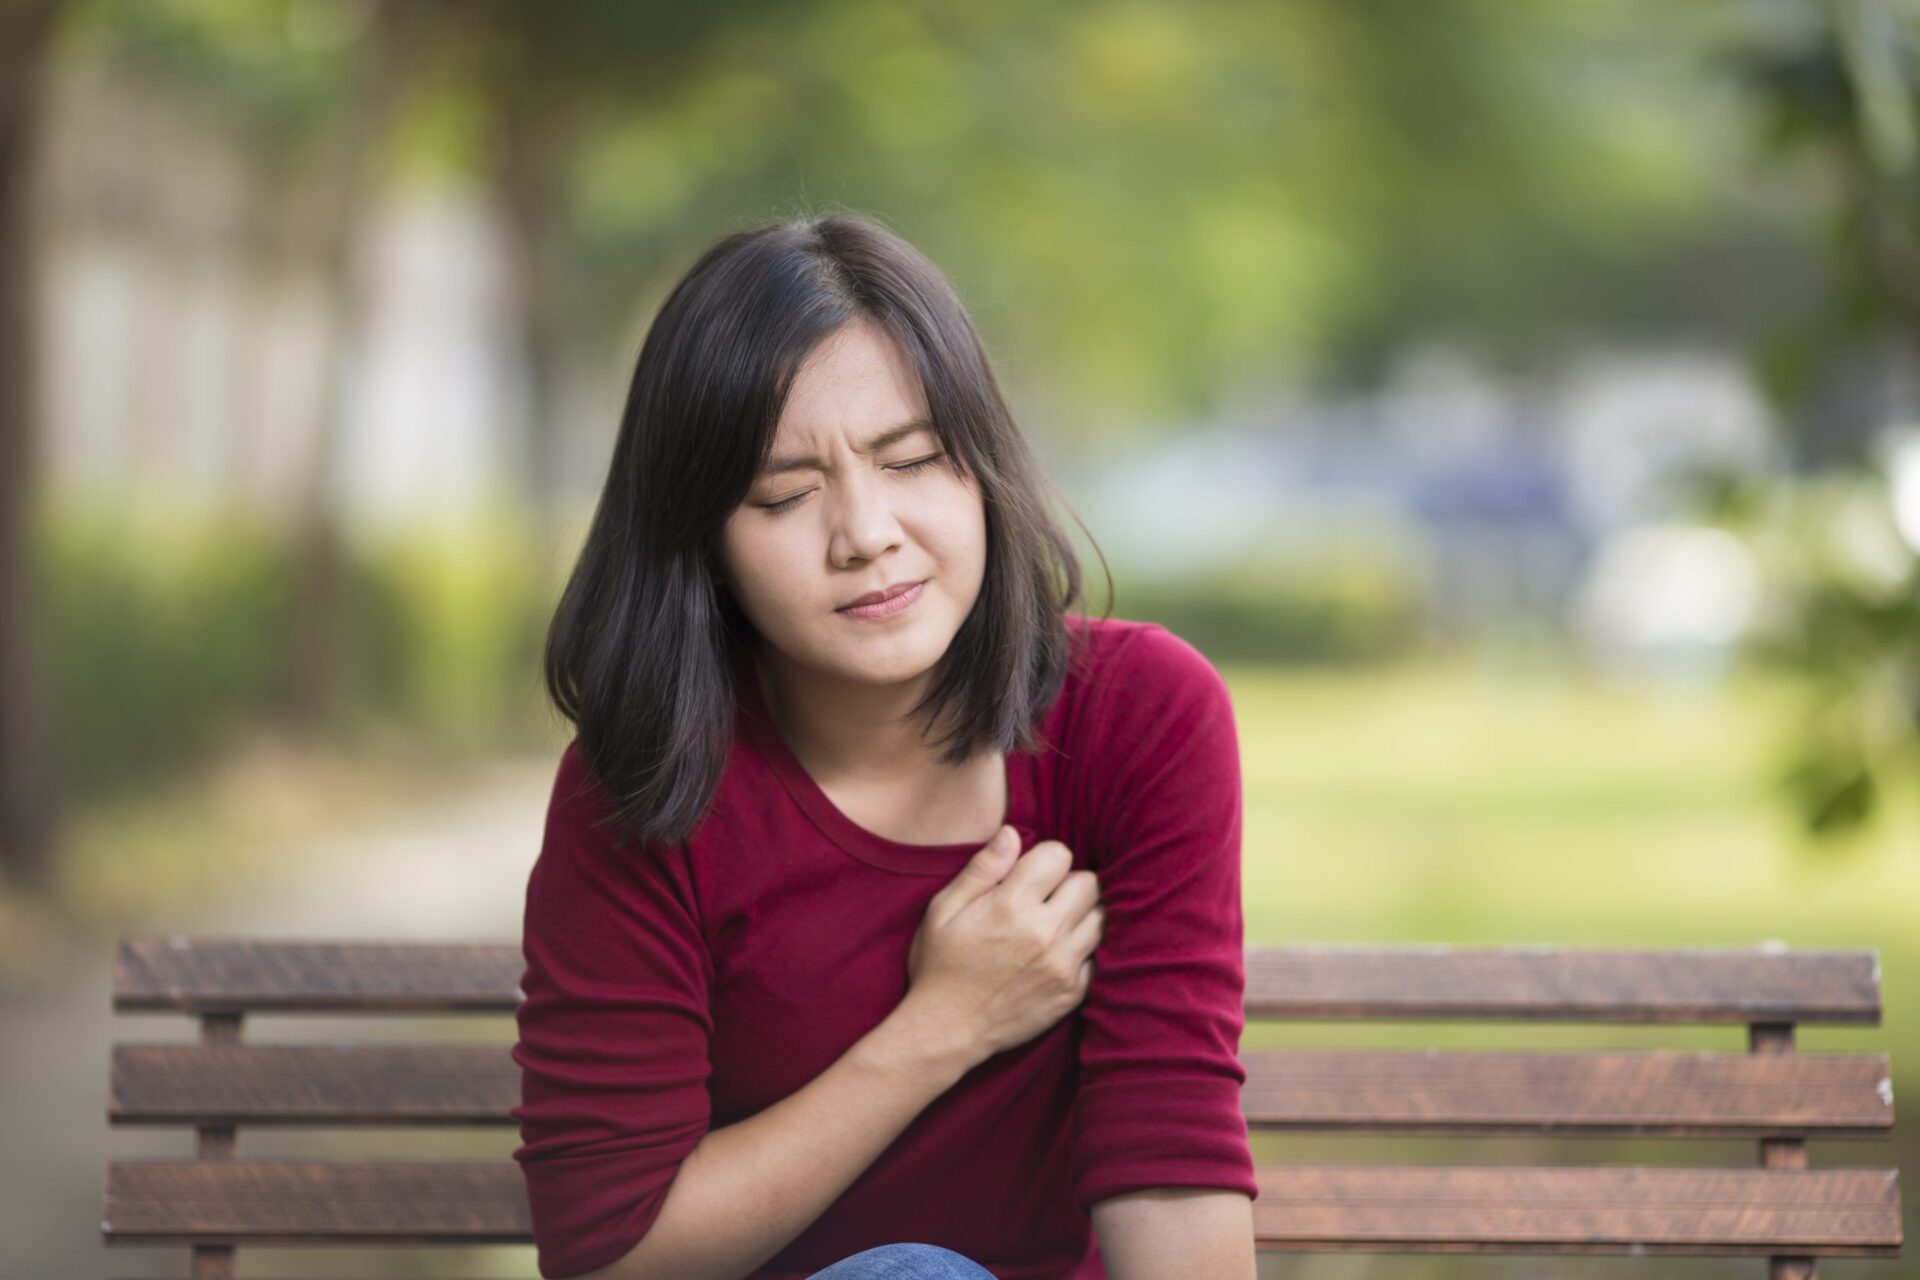 A young woman sitting on a park bench looks pained as she clenches a fist over her heart